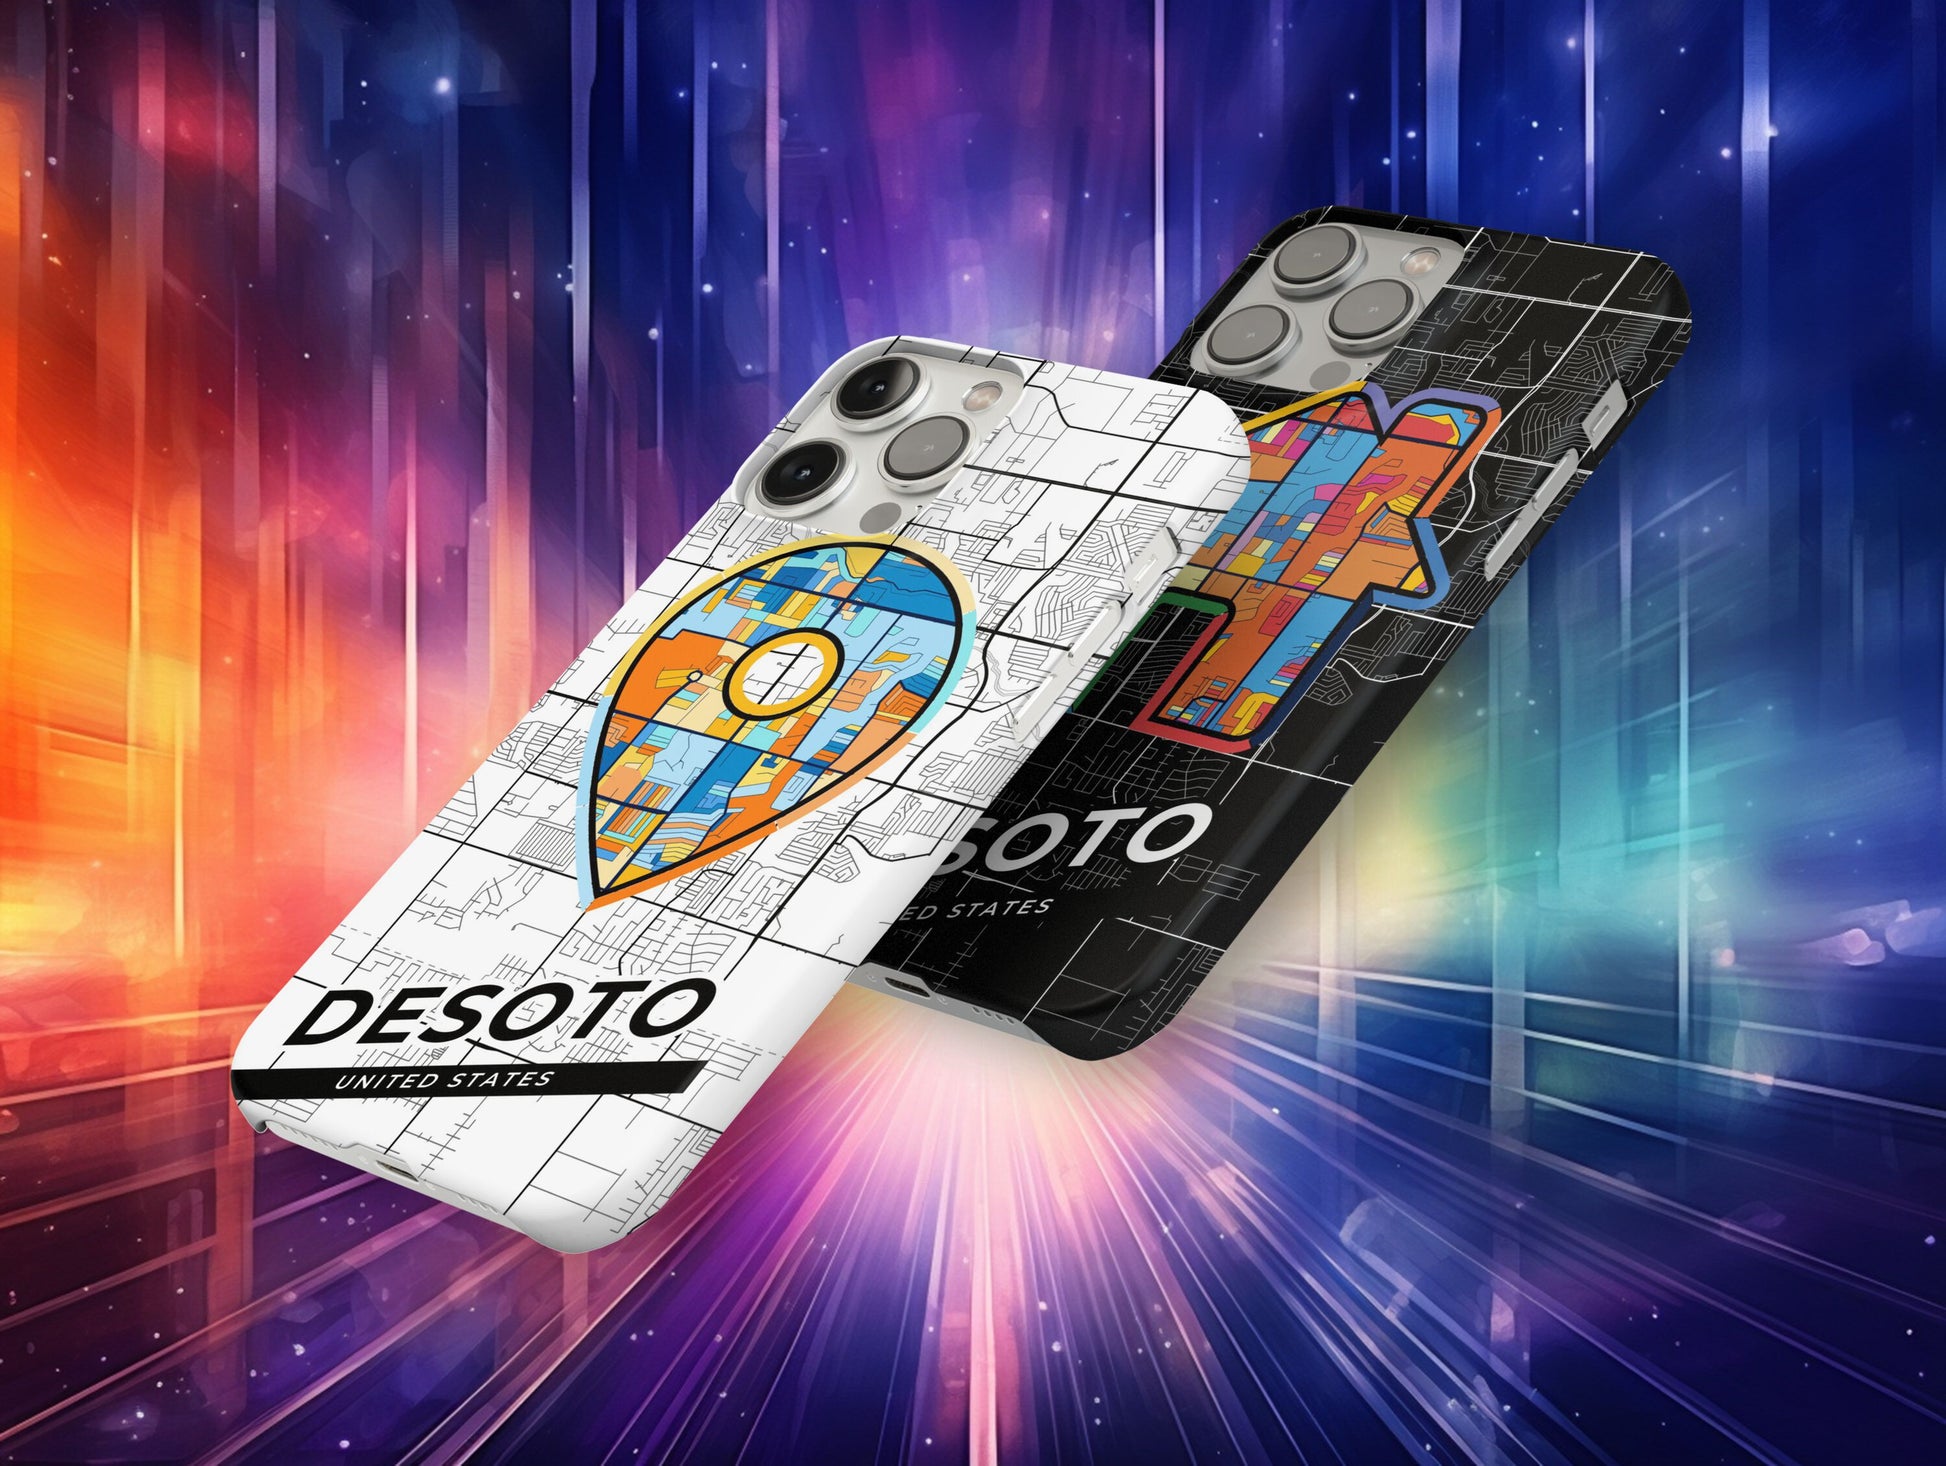 Desoto Texas slim phone case with colorful icon. Birthday, wedding or housewarming gift. Couple match cases.